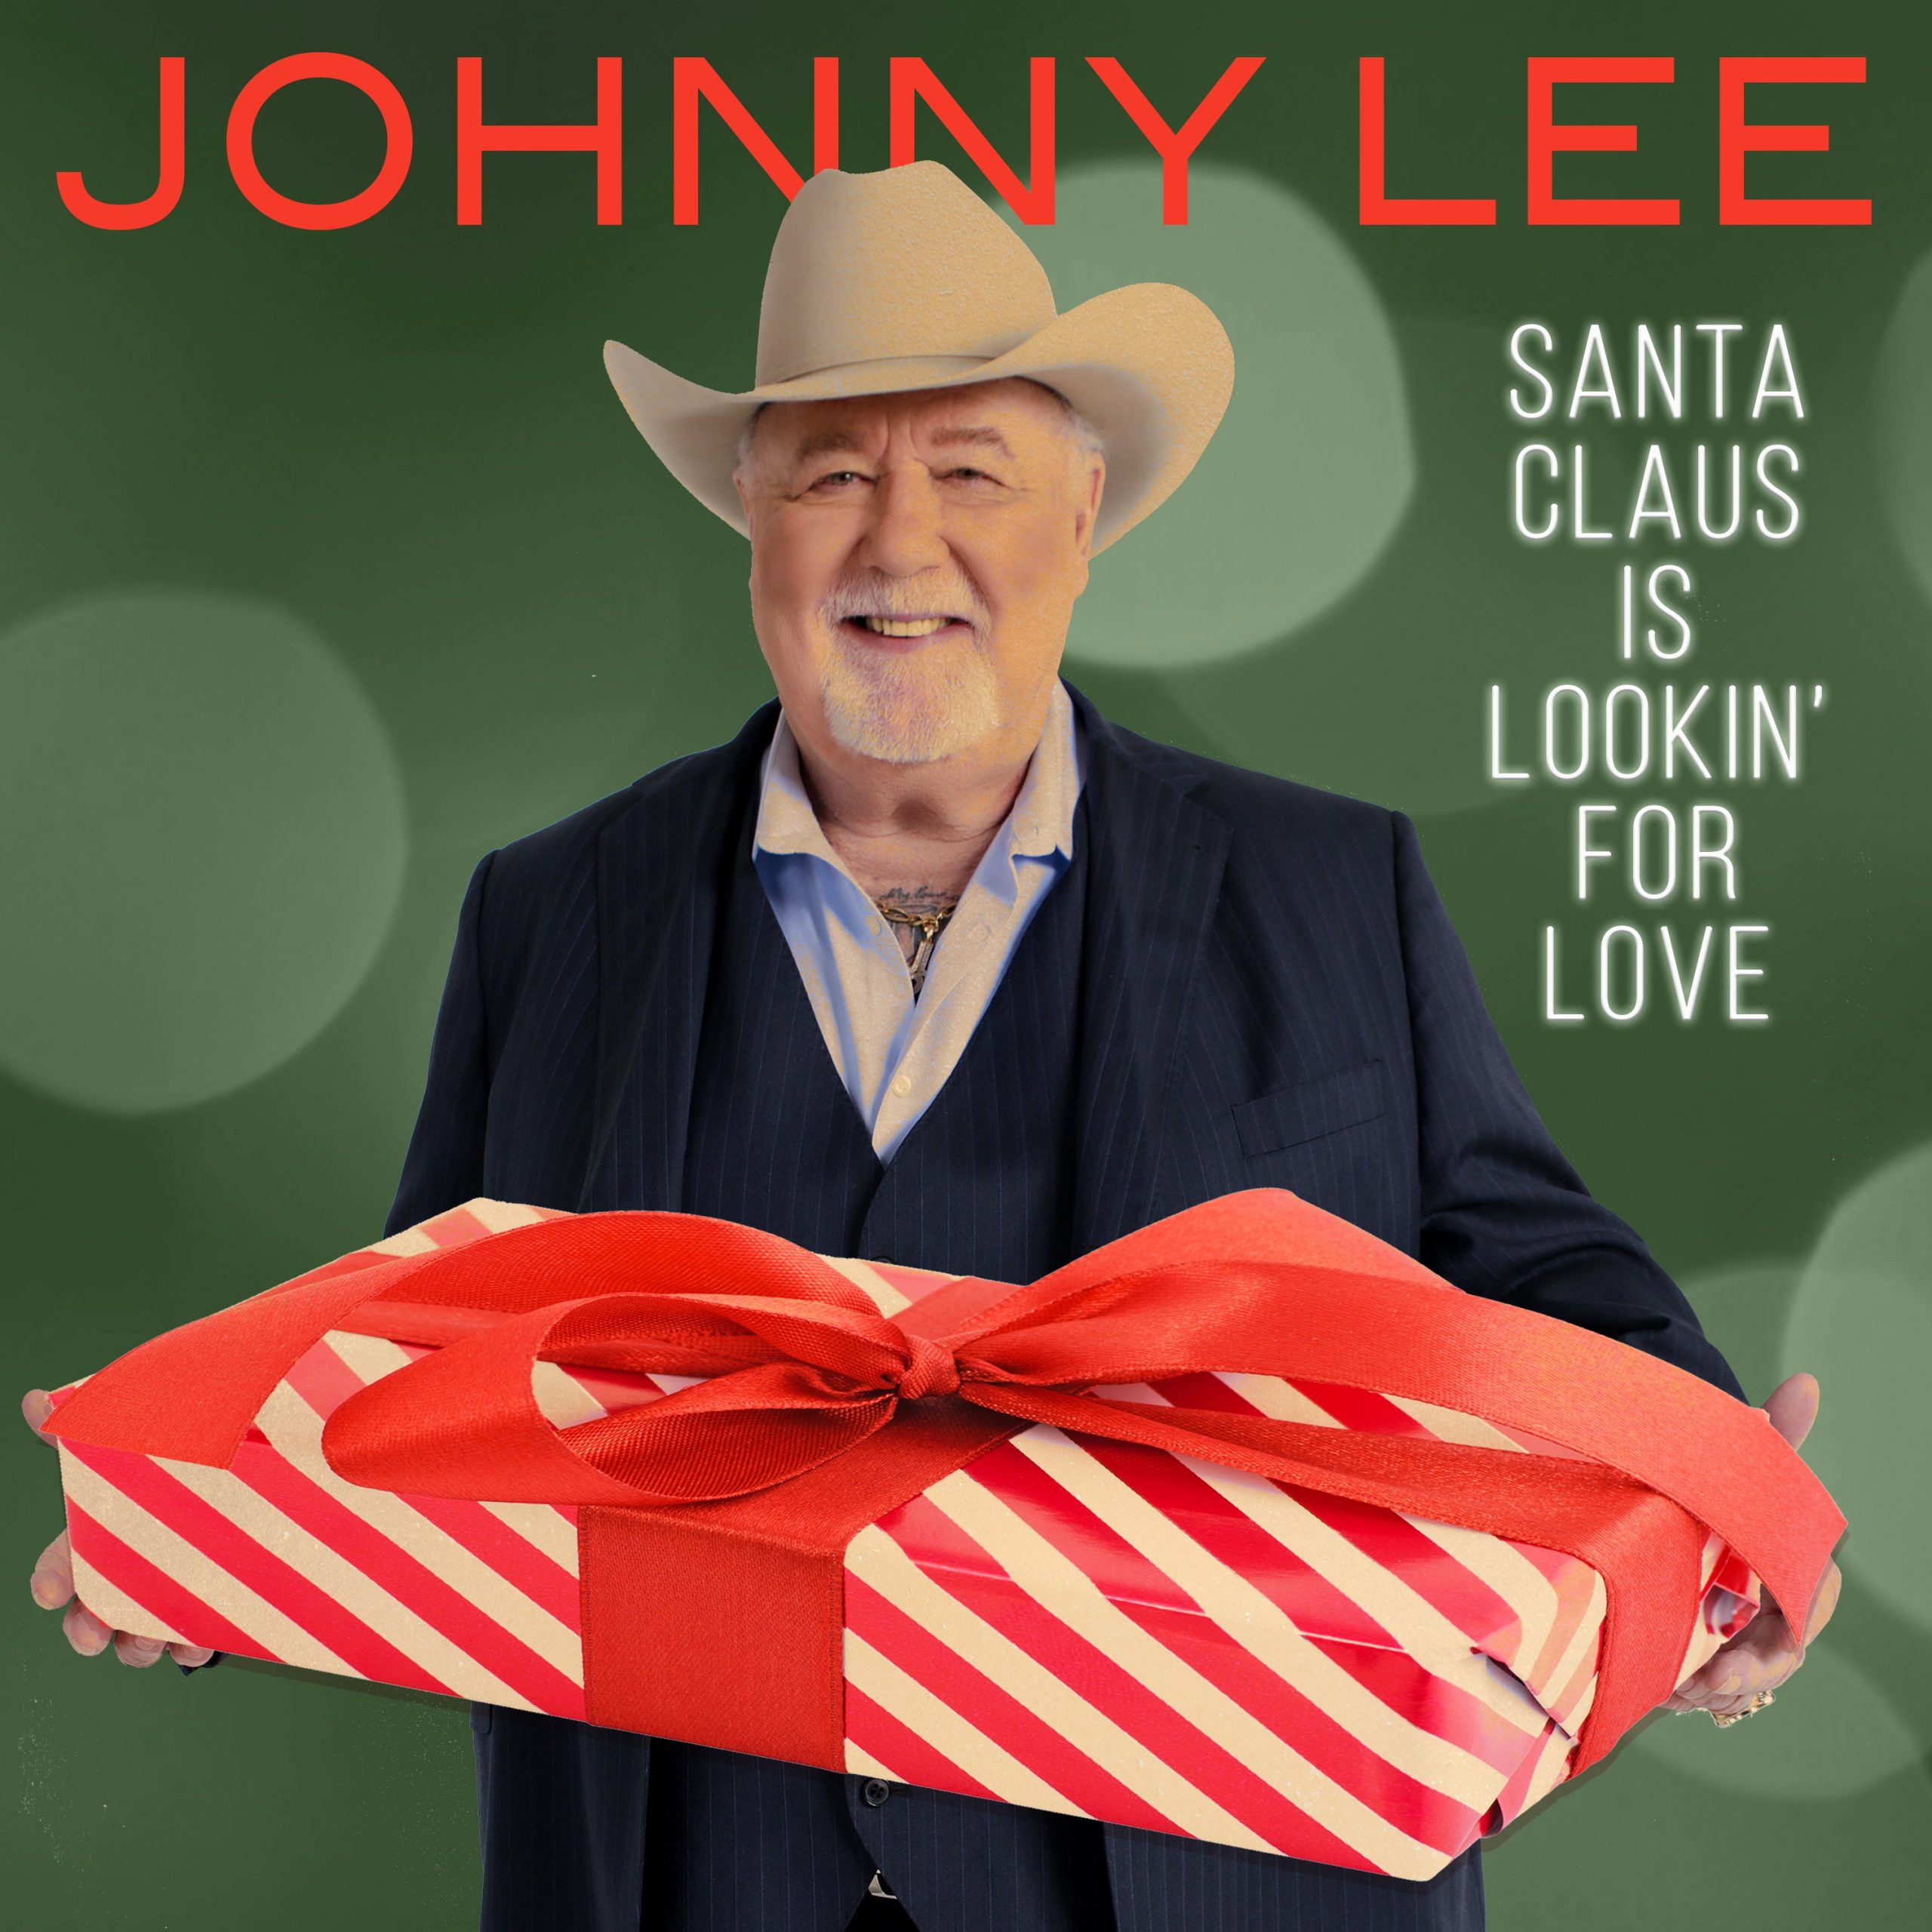 Johnny-Lee-Santa-Claus-Is-Lookin-For-Love-Cover-1-scaled.jpg